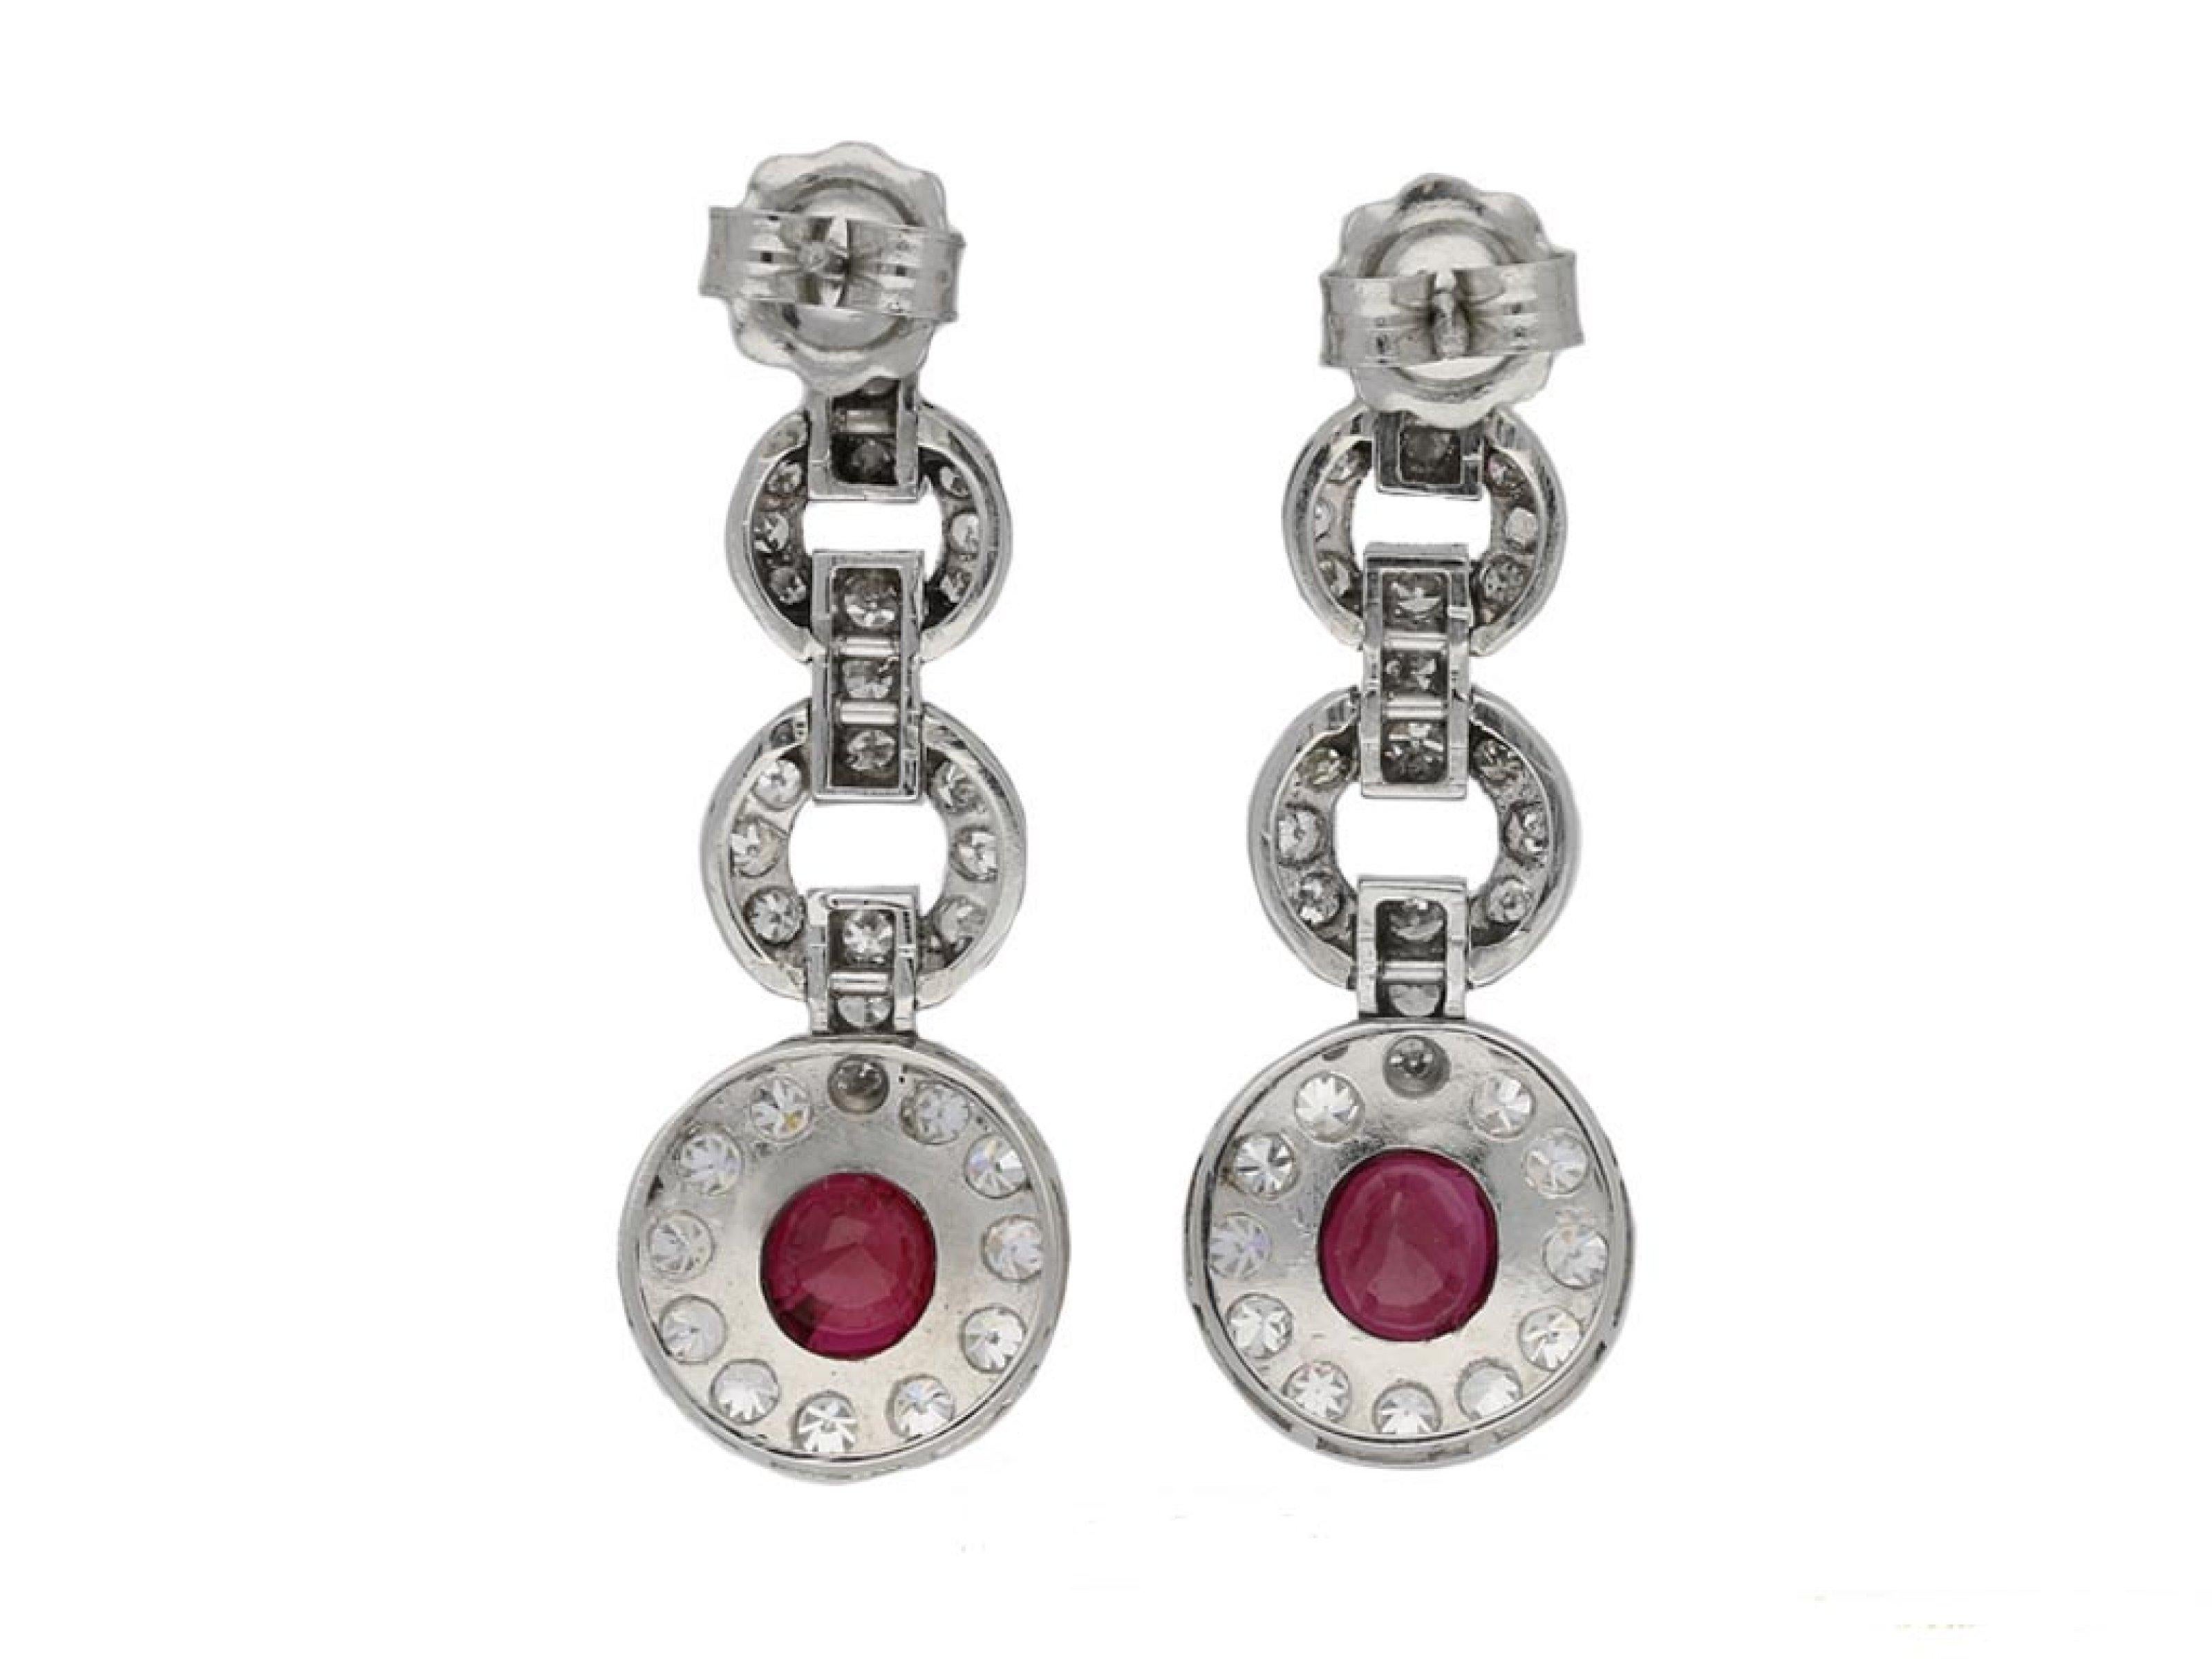 Burmese ruby and diamond earrings. A matching pair of earrings, each set with a cushion shape old cut natural unenhanced Burmese ruby in an open back rubover setting, one approximately 1.13 carats, the other approximately 1.04 carats, further